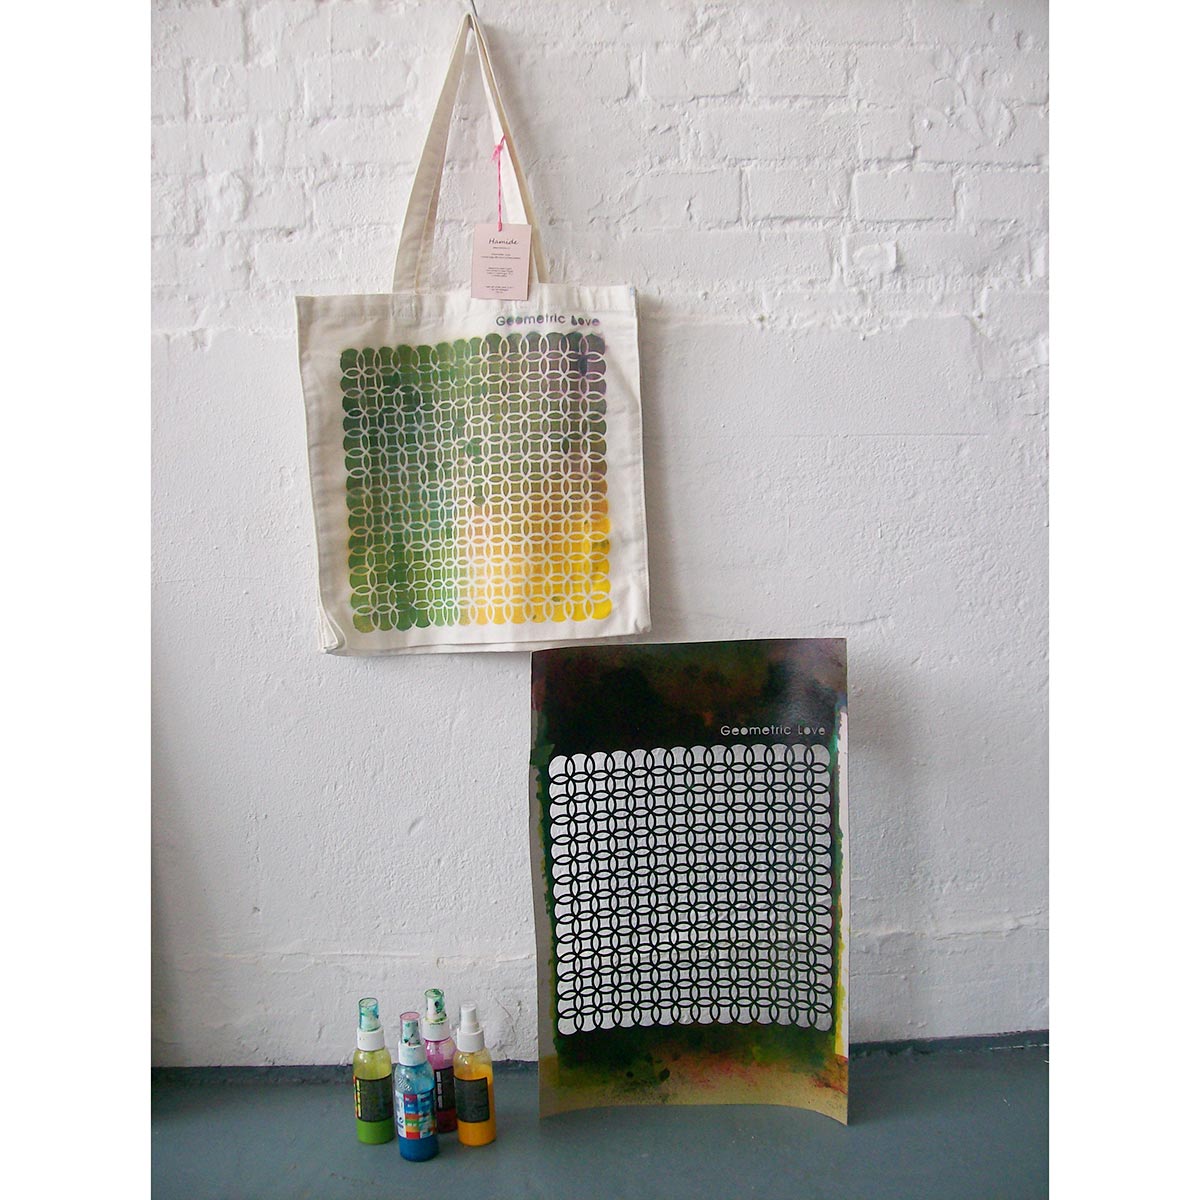 "Geometric Love" canvas bag with the materials used to paint it